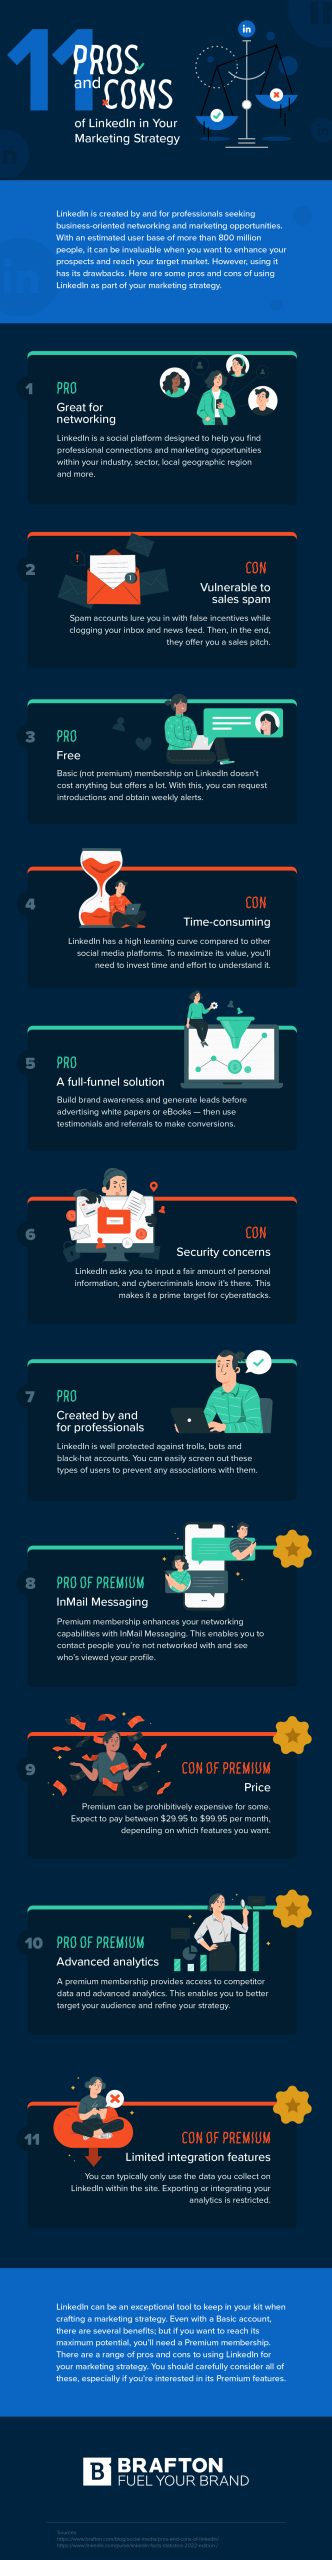 Pros and Cons of LinkedIn in Your Marketing Strategy infographic